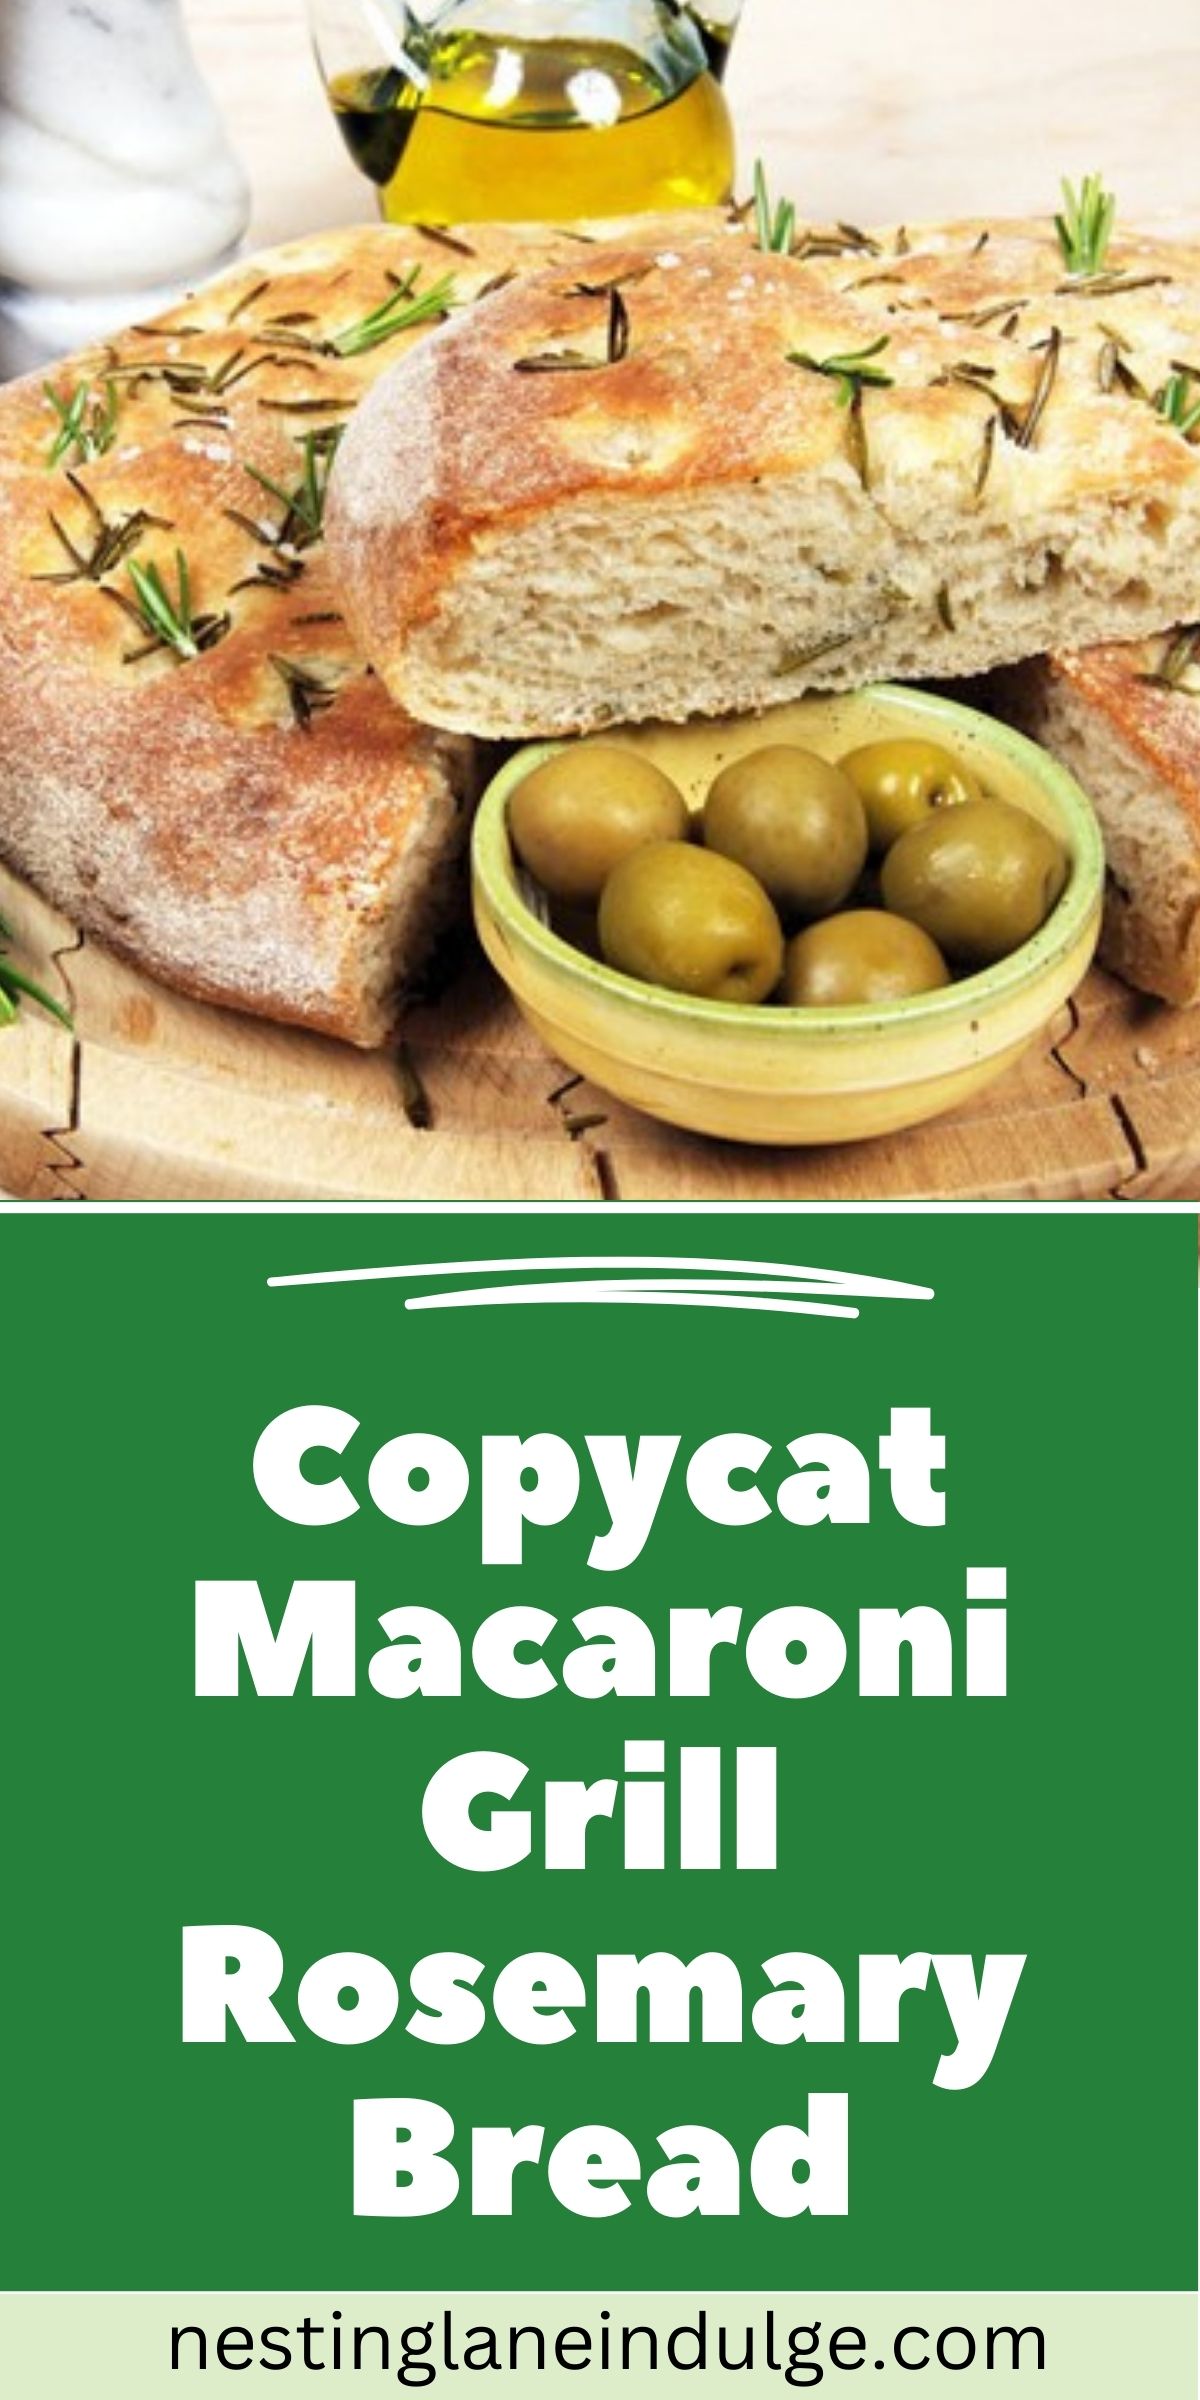 Graphic for Pinterest of Copycat Macaroni Grill Rosemary Bread Recipe.